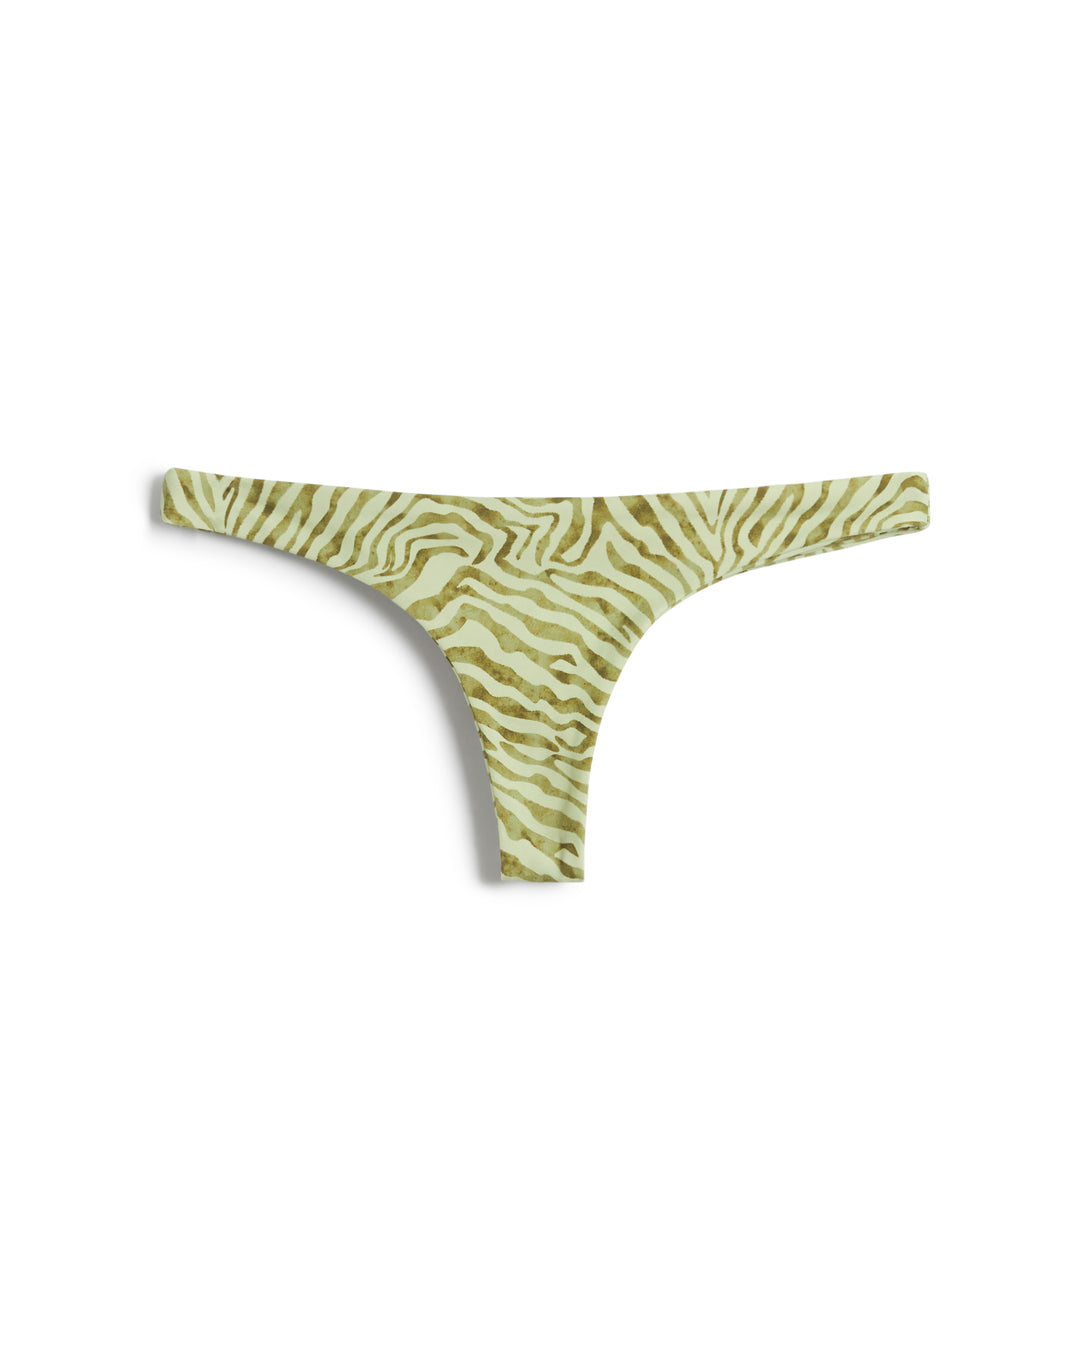 A women's thong, The Gomera Bottom - Arbequina by Dandy Del Mar, with a green and beige zebra print design, featuring a cheeky coverage.